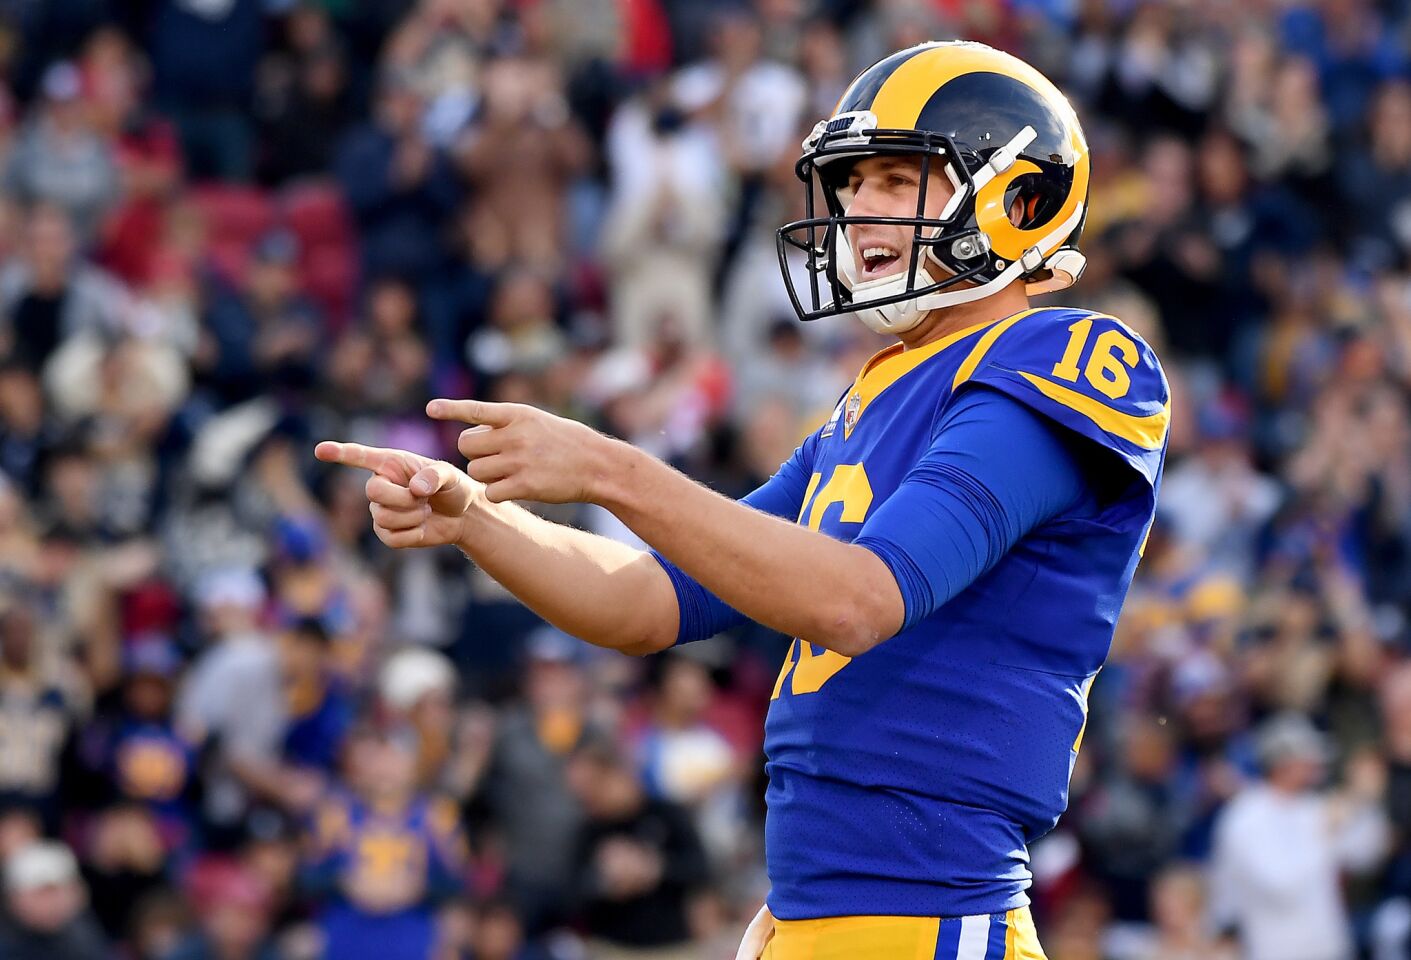 Rams quarterback Jared Goff celebrates his touchdown pass to Brandin Cooks against the 49ers.